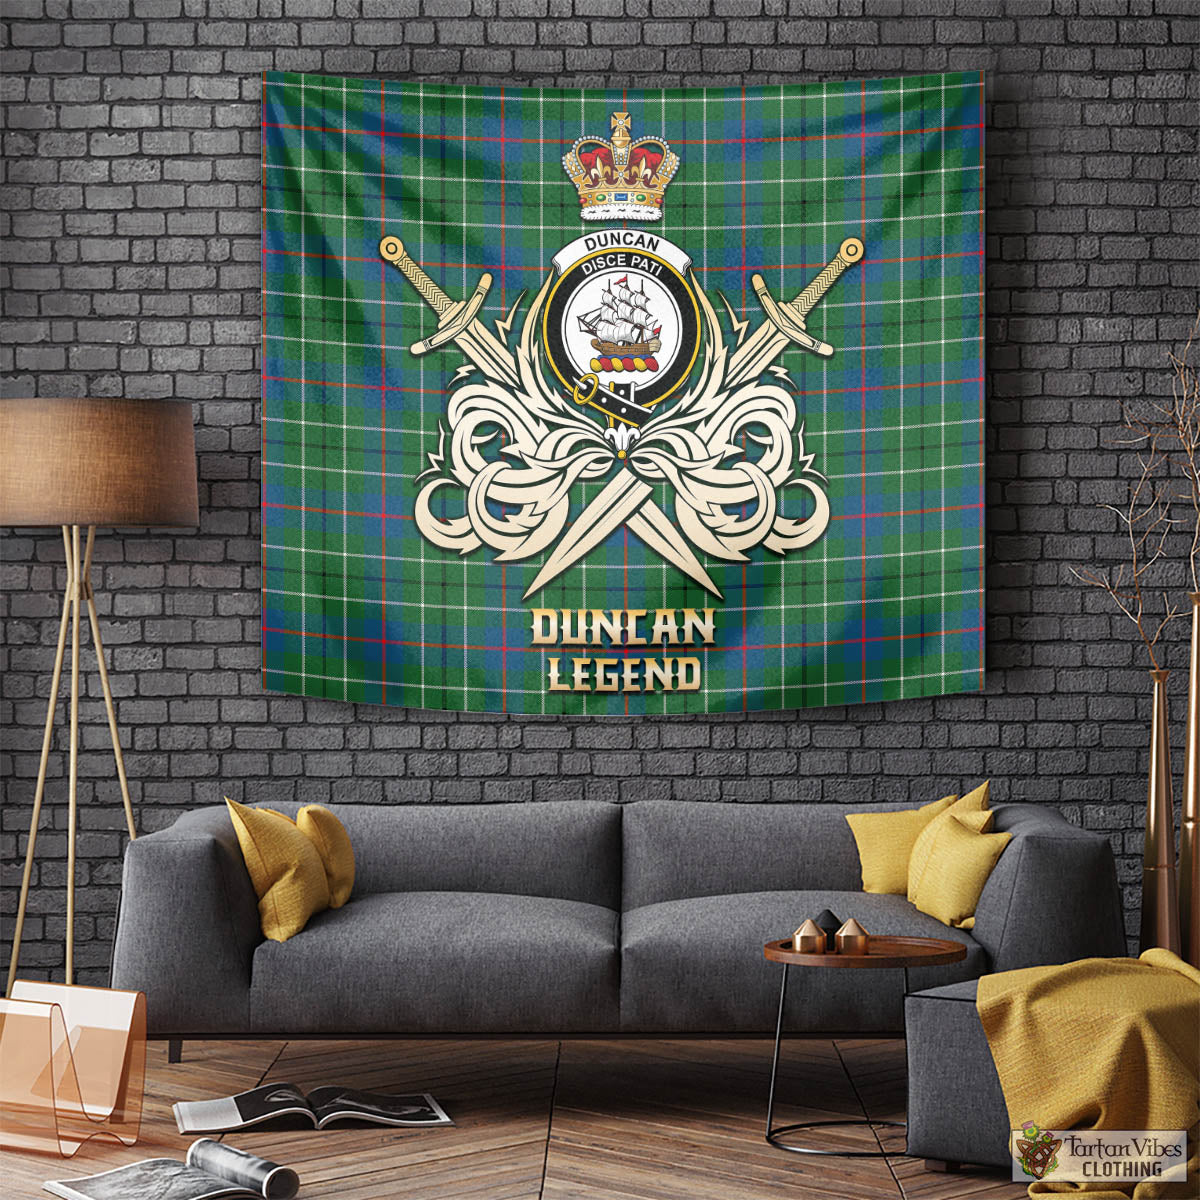 Tartan Vibes Clothing Duncan Ancient Tartan Tapestry with Clan Crest and the Golden Sword of Courageous Legacy